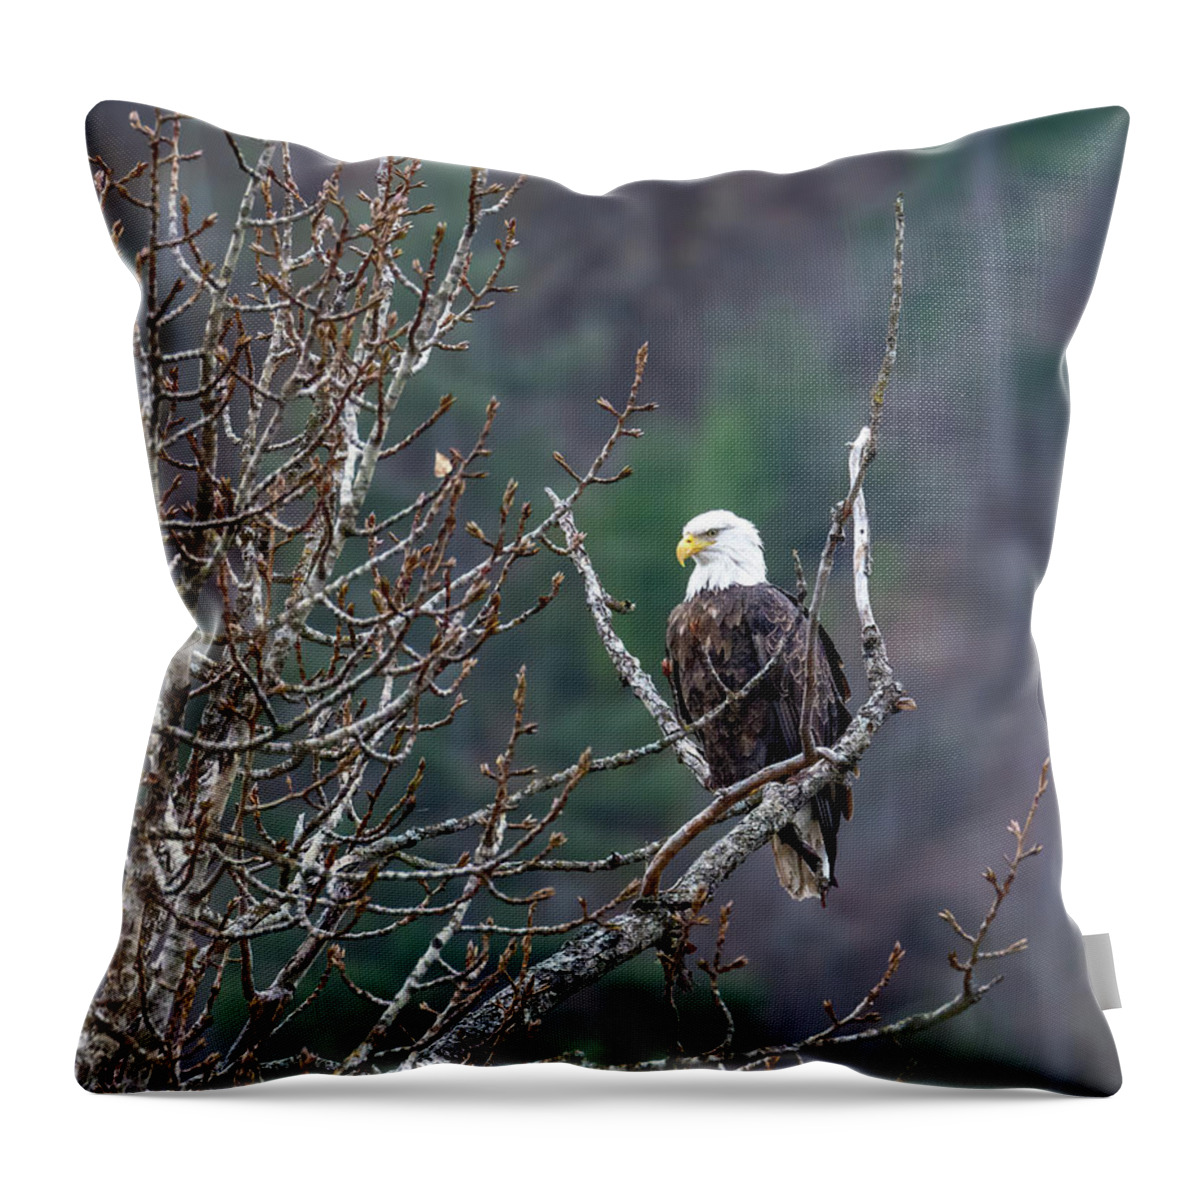 Bald Eagle Profile Throw Pillow featuring the photograph Bald Eagle Profile by Jemmy Archer